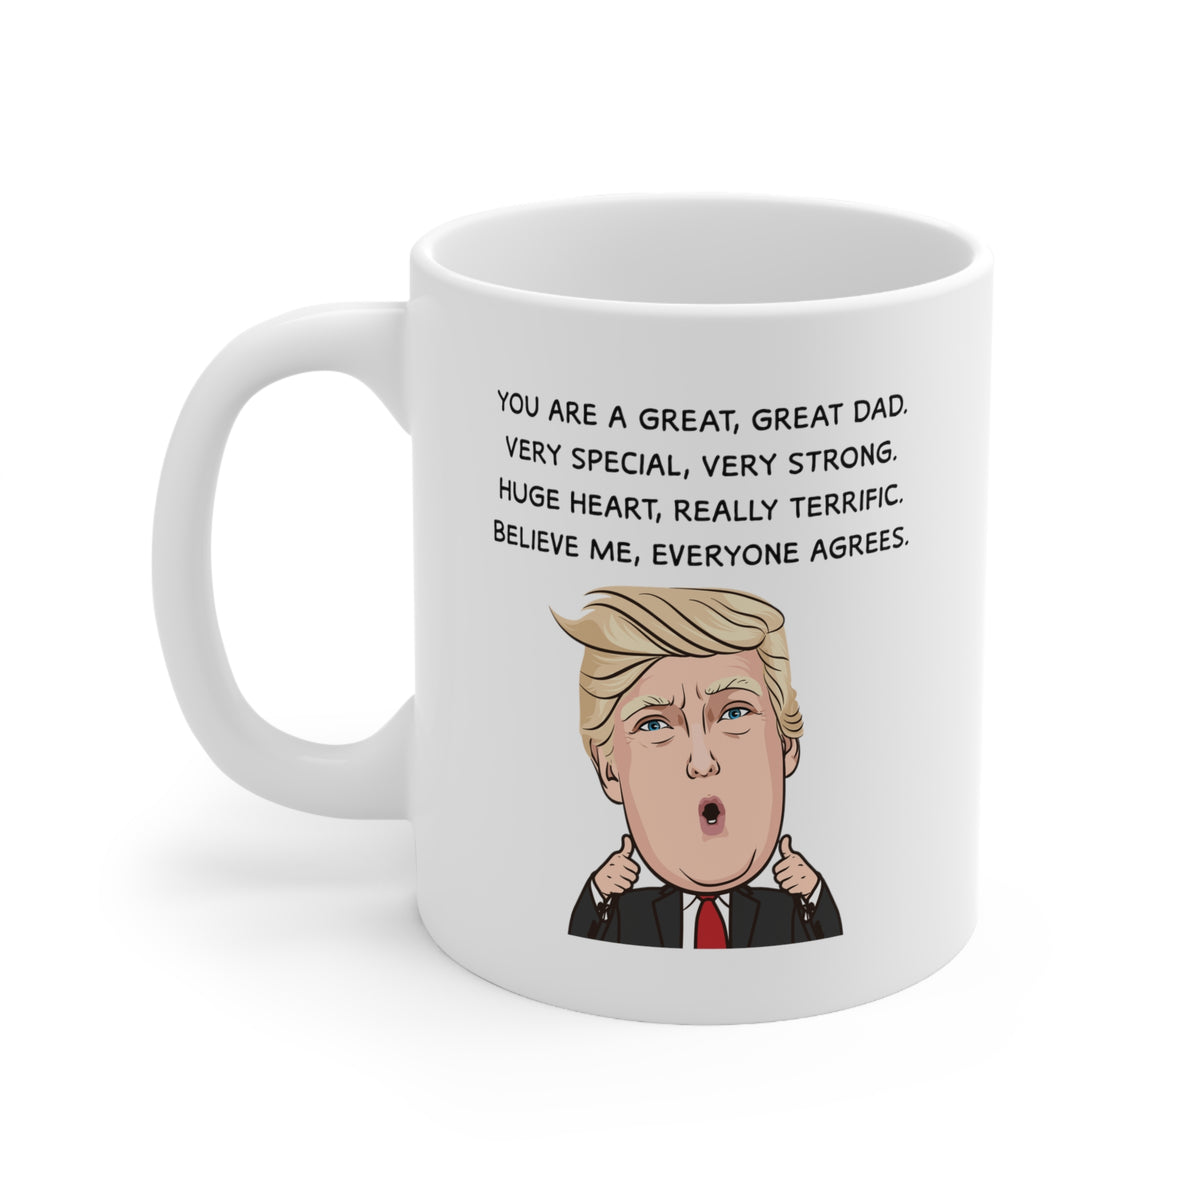 Funny Dad Donald Trump Mug - Best Father's Day Cup - President Novelty Christmas Gift Idea